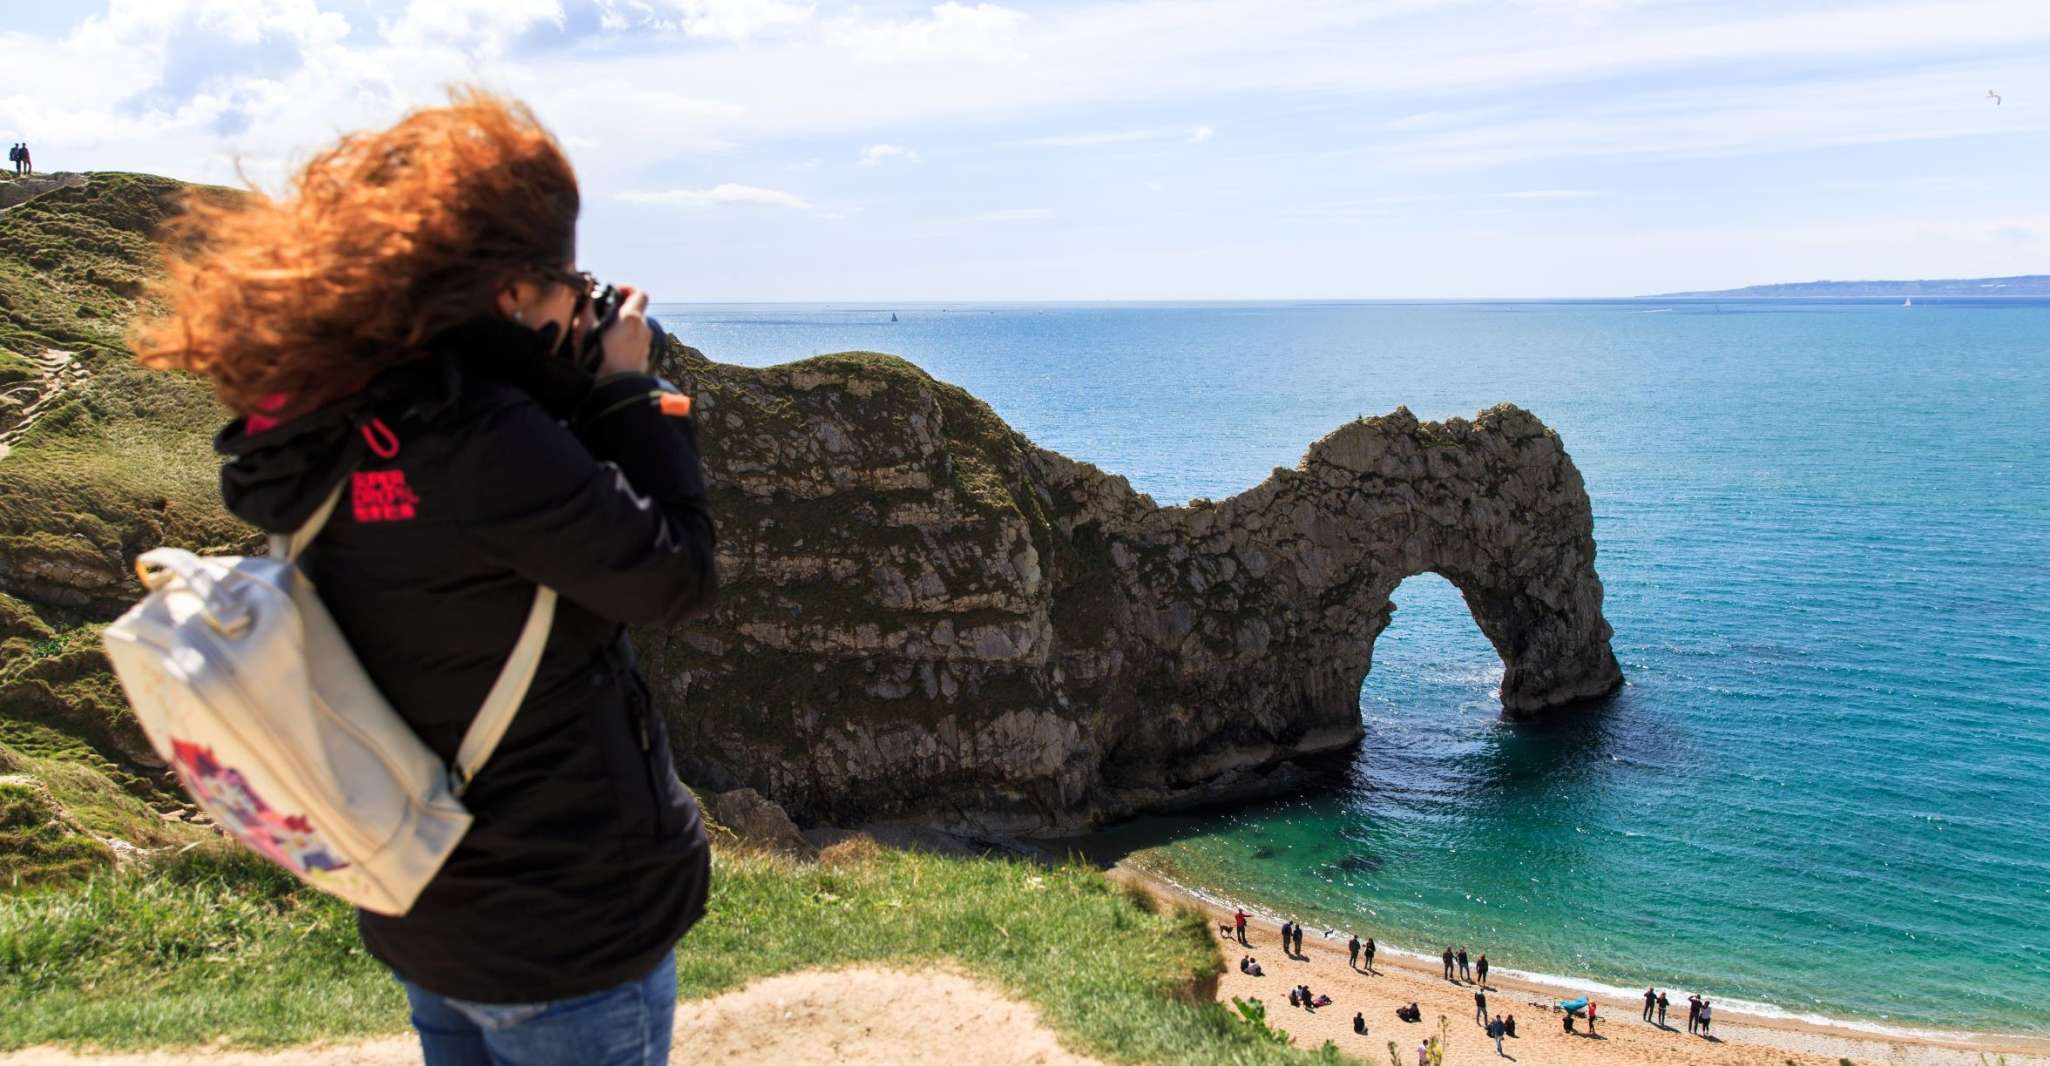 From Bournemouth, Lulworth Cove and Durdle Door Trip - Housity